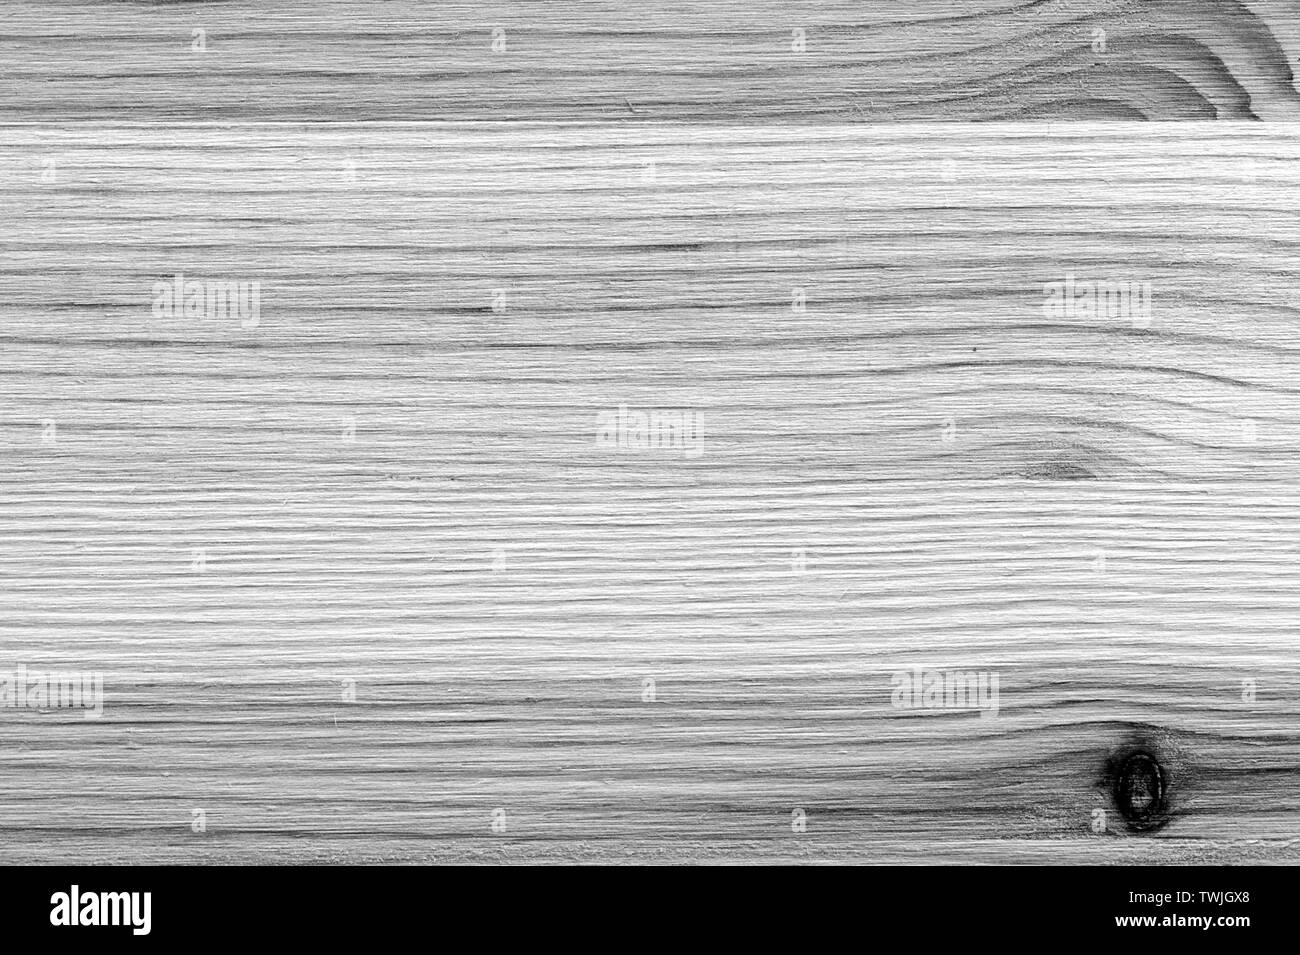 Texture of wood close up. Monochrome wooden background Stock Photo